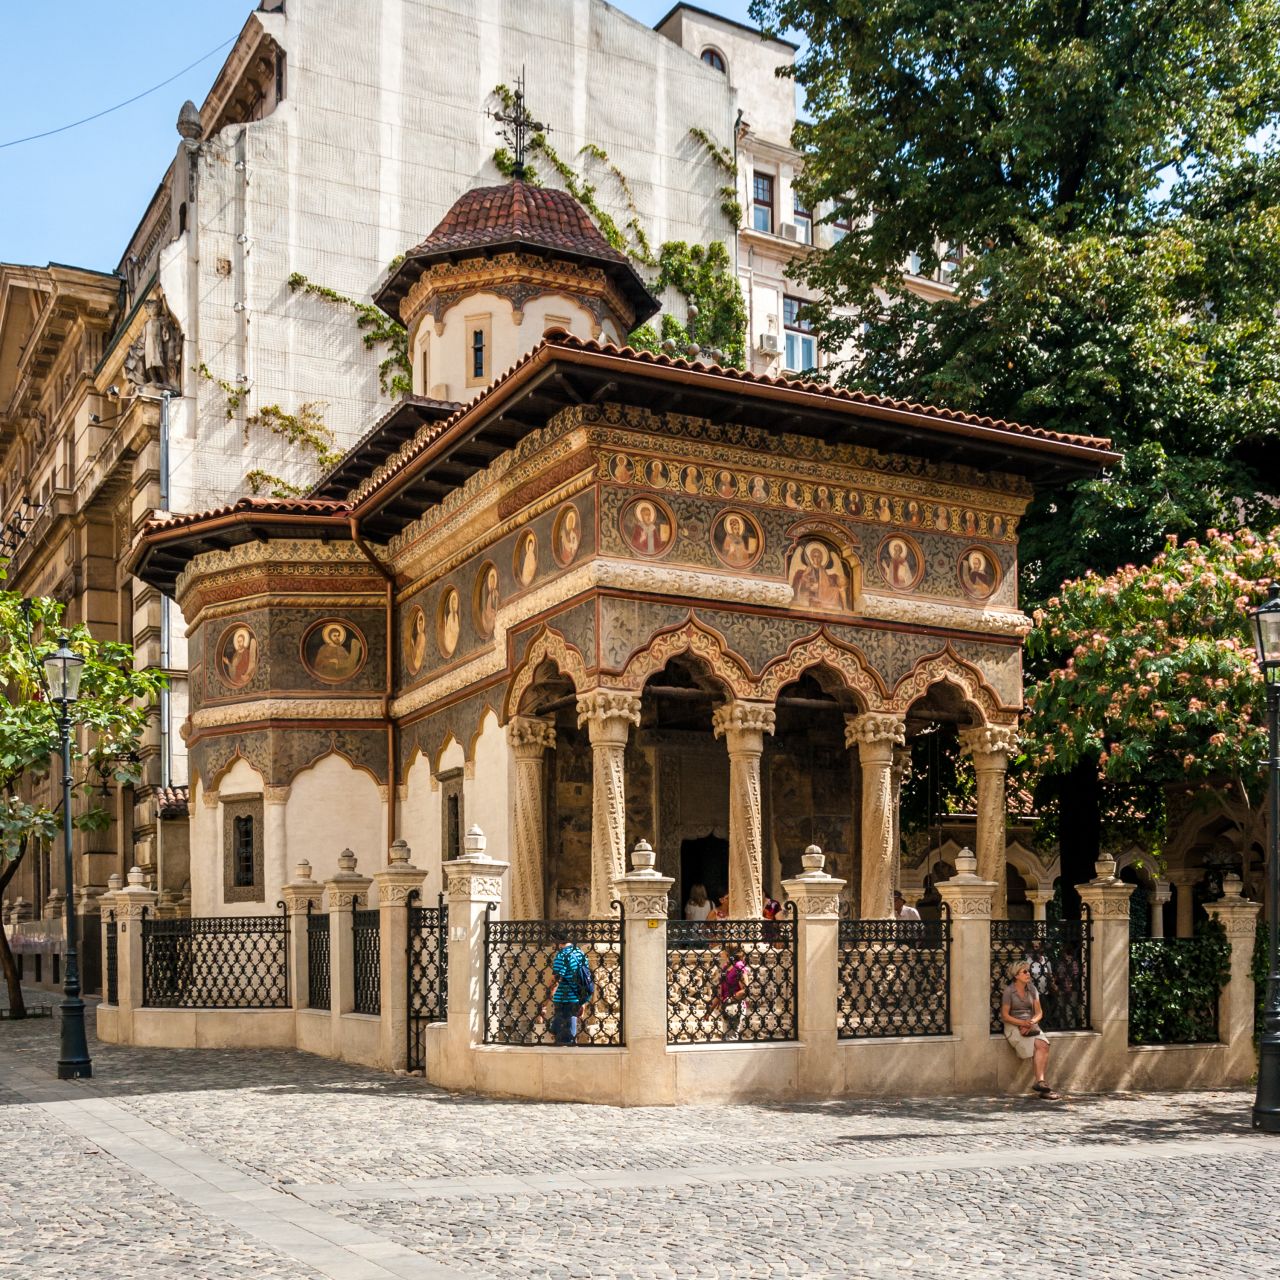 The intimate Stavropoleos Church was built in the 18th century by Greek monk Ioanikie Stratonikeas.